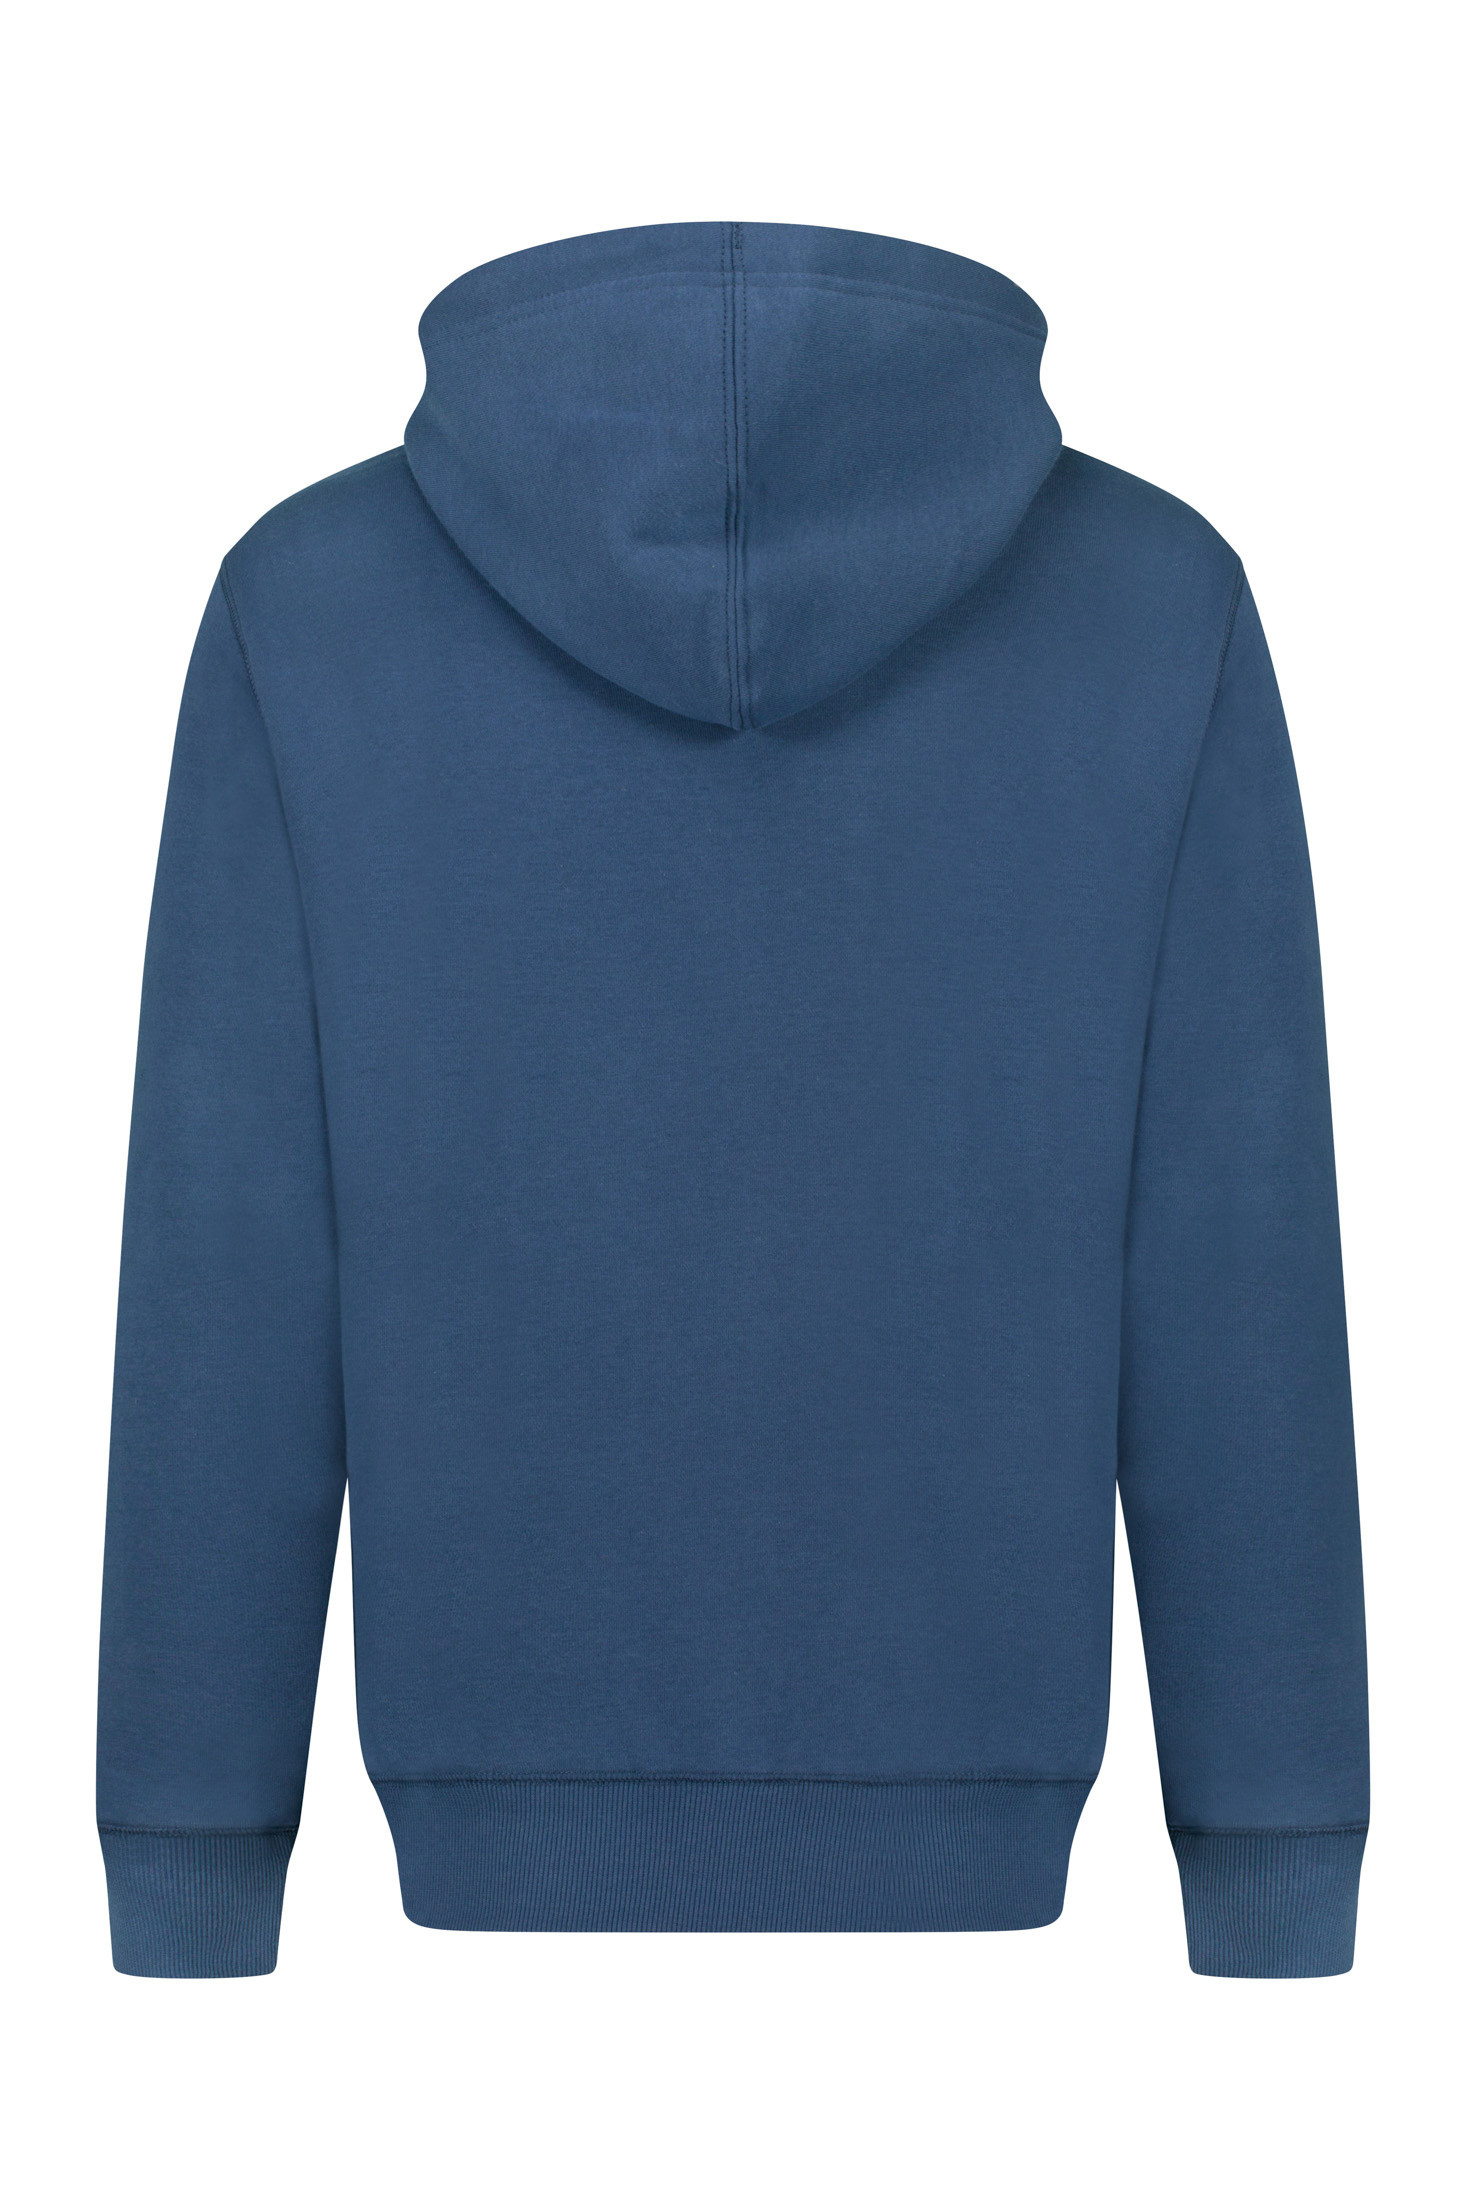 Russell Athletic - Hoodie, Blue, large image number 1